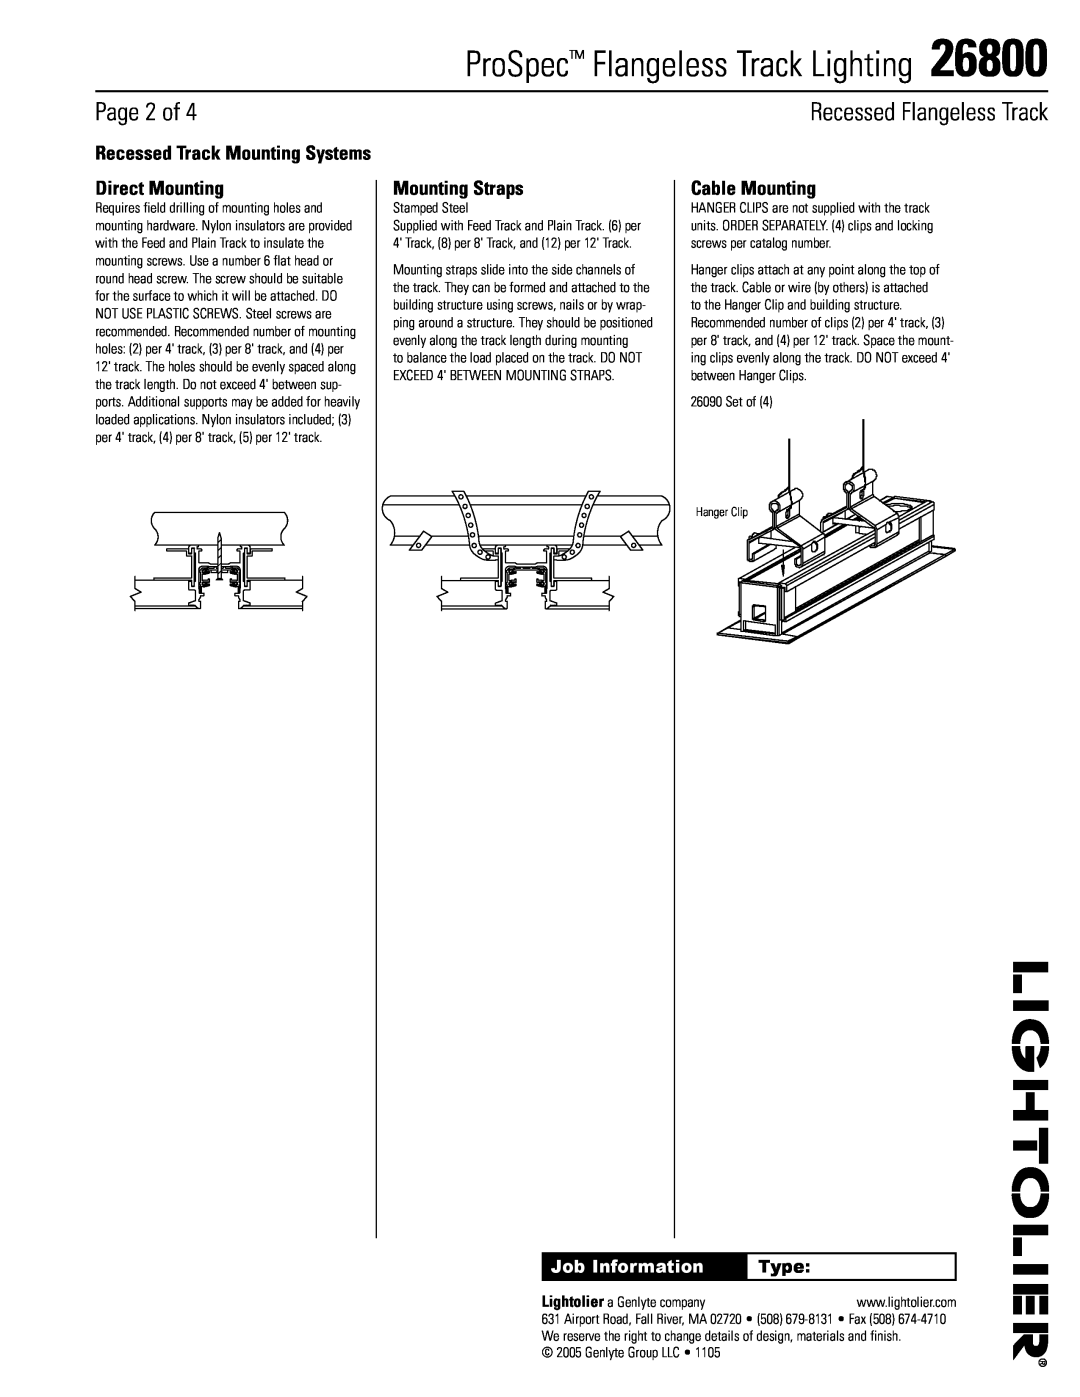 Lightolier 26800 manual Page of, Recessed Track Mounting Systems Direct Mounting, Mounting Straps, Cable Mounting, Type 